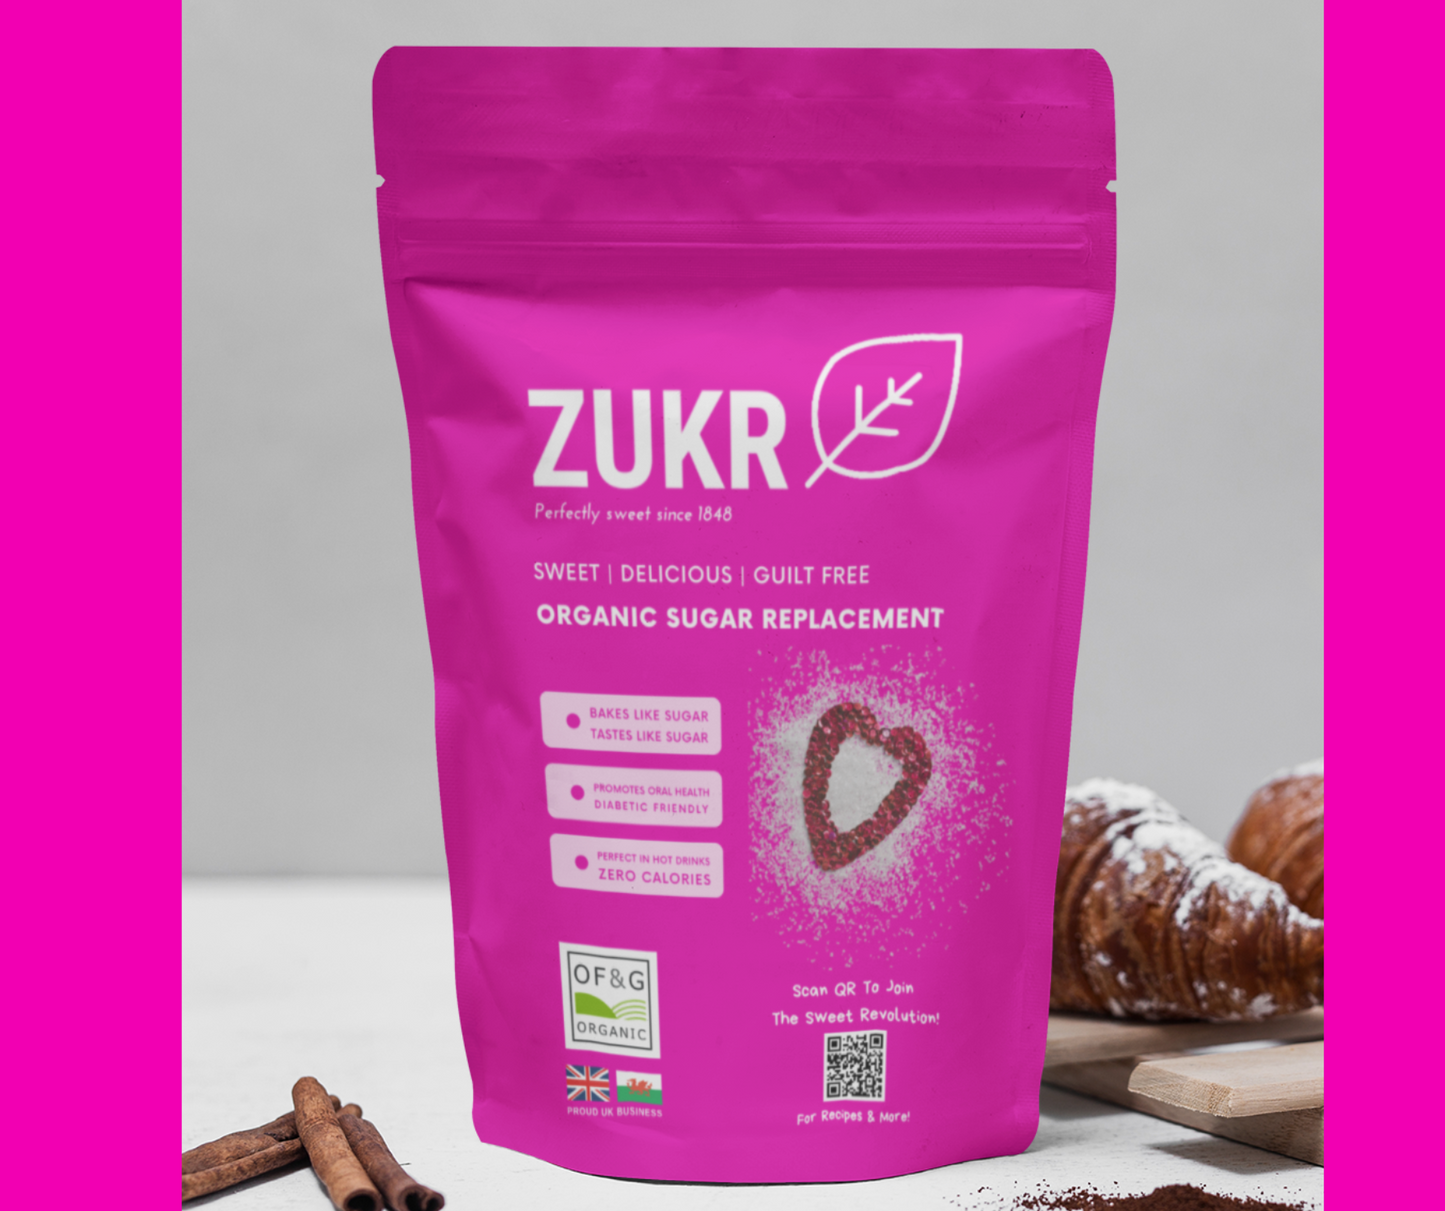 ZUKR Natural Organic Sugar Replacement effortlessly blends into hot beverages, providing a guilt-free sweetness without compromising on taste.